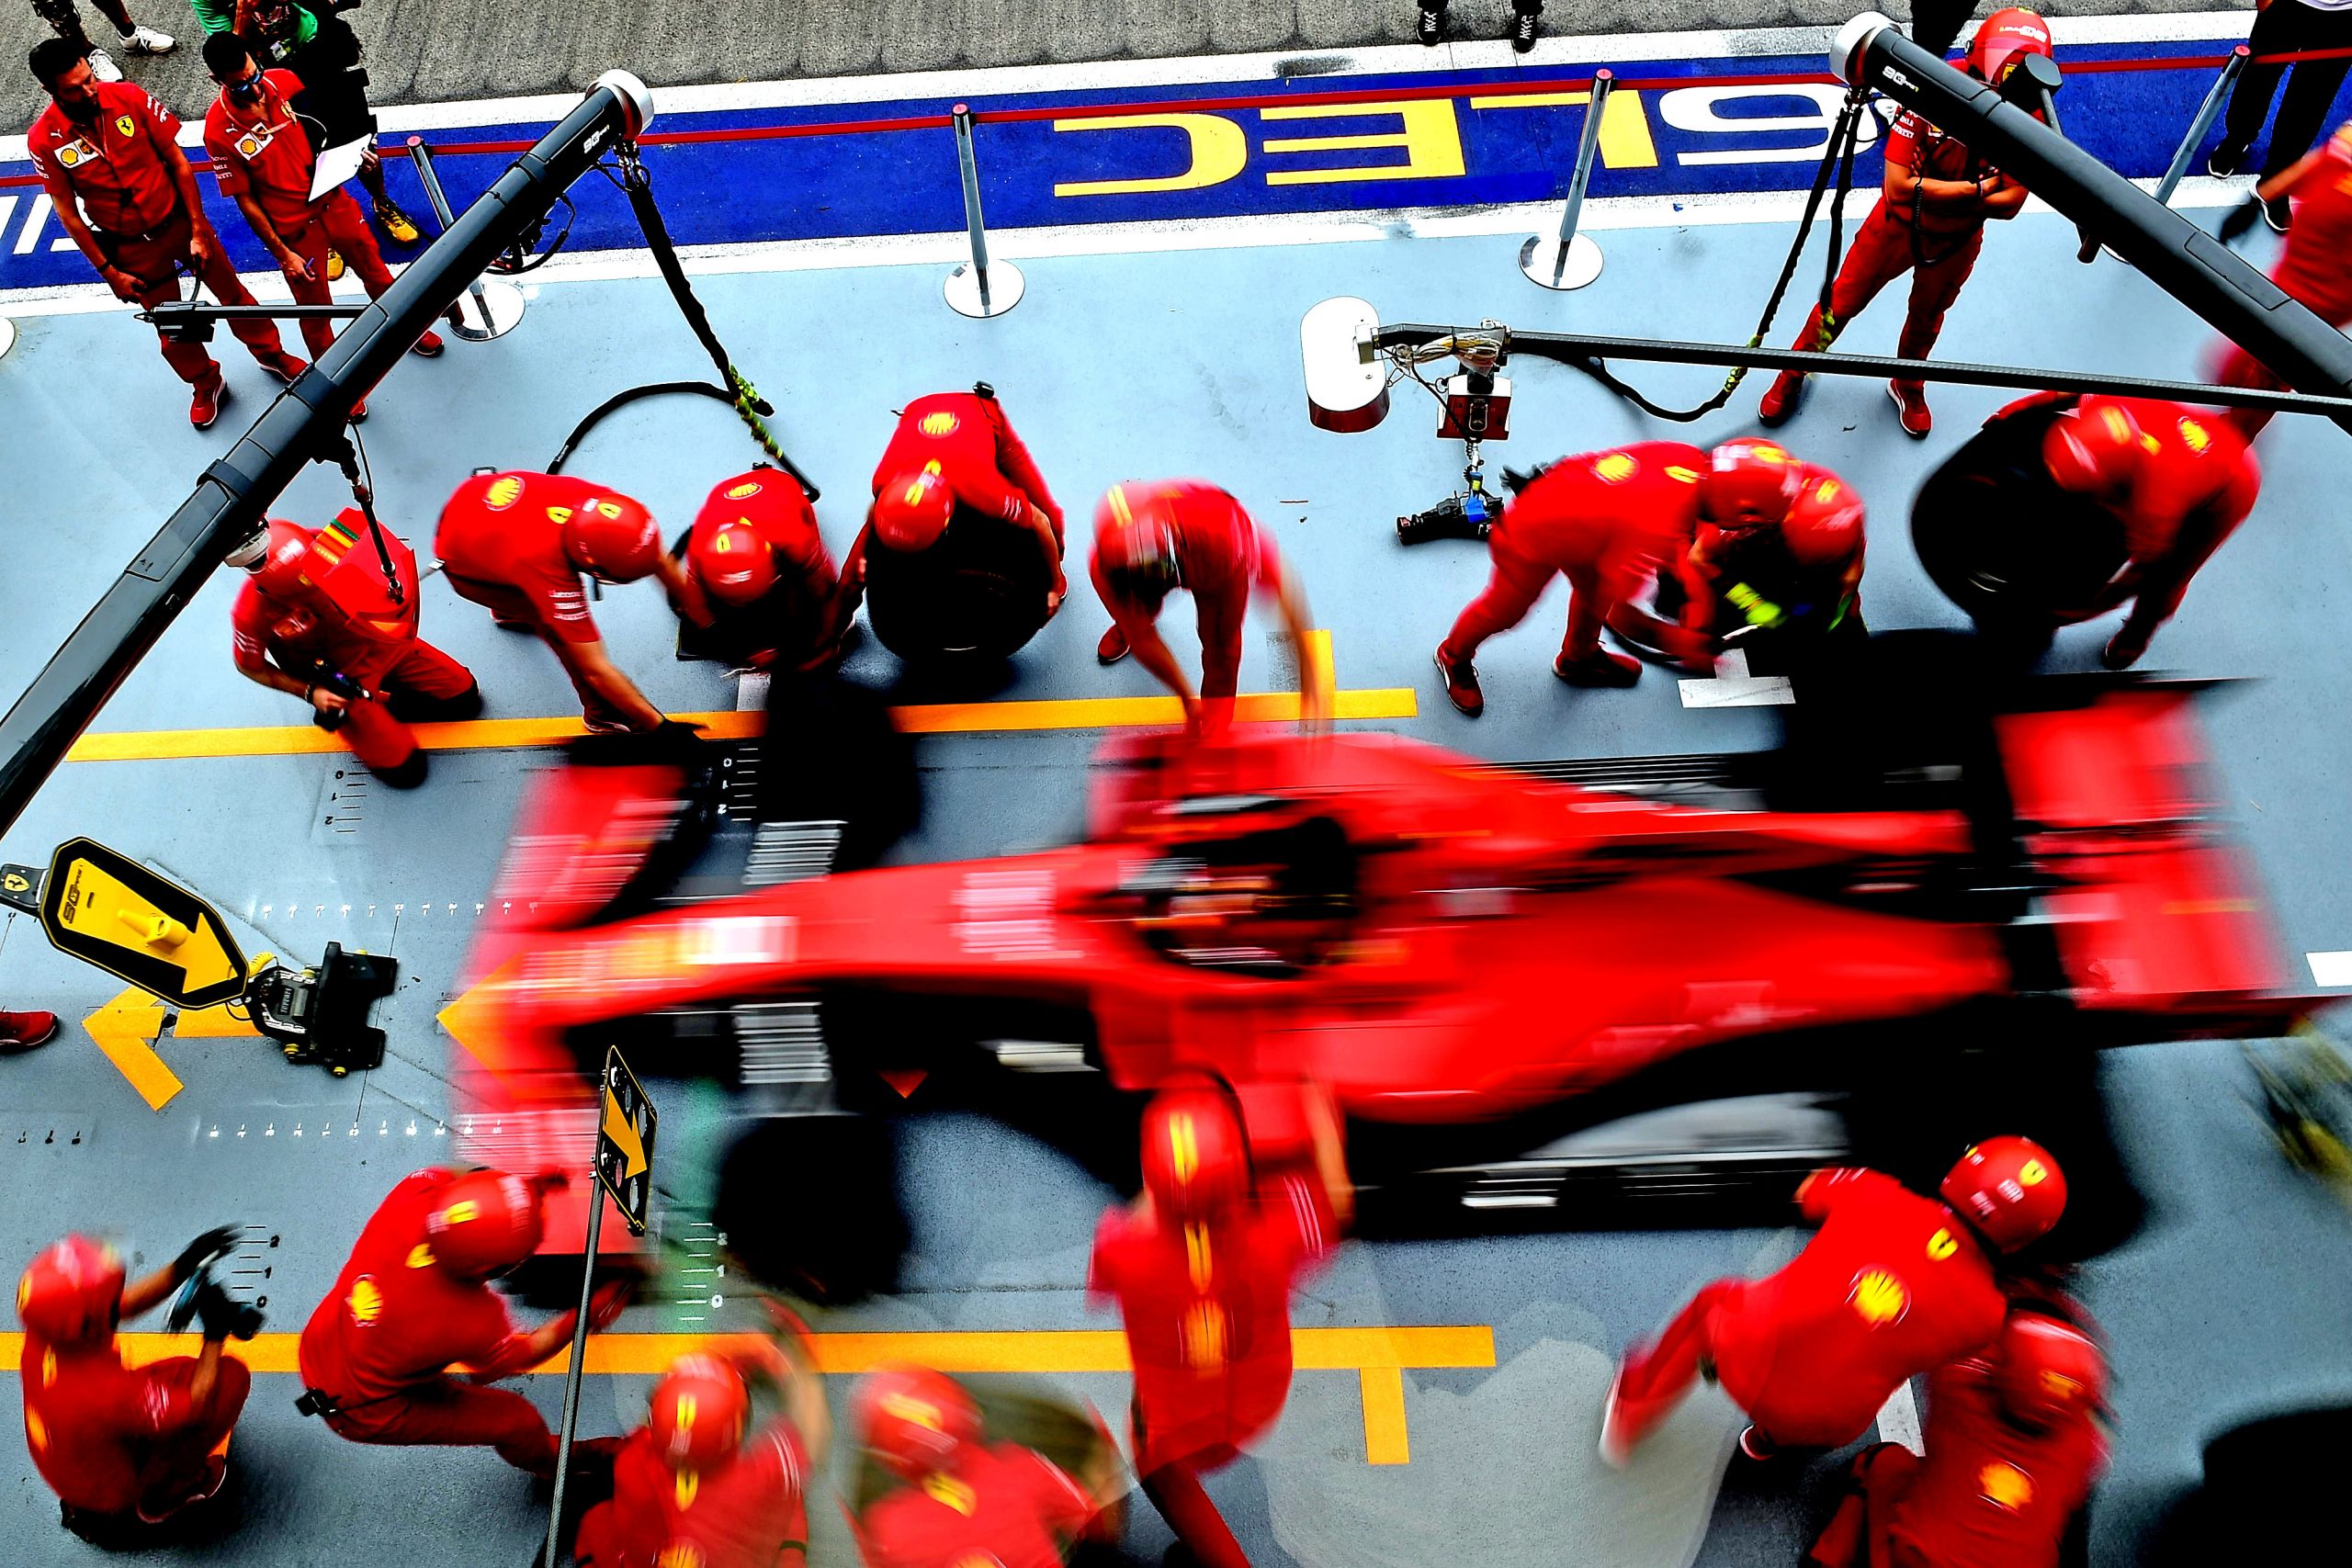 Sebastian Vettel pitting in the 2019 Singapore Grand Prix is a fantastic example of how the undercut works in Formula 1